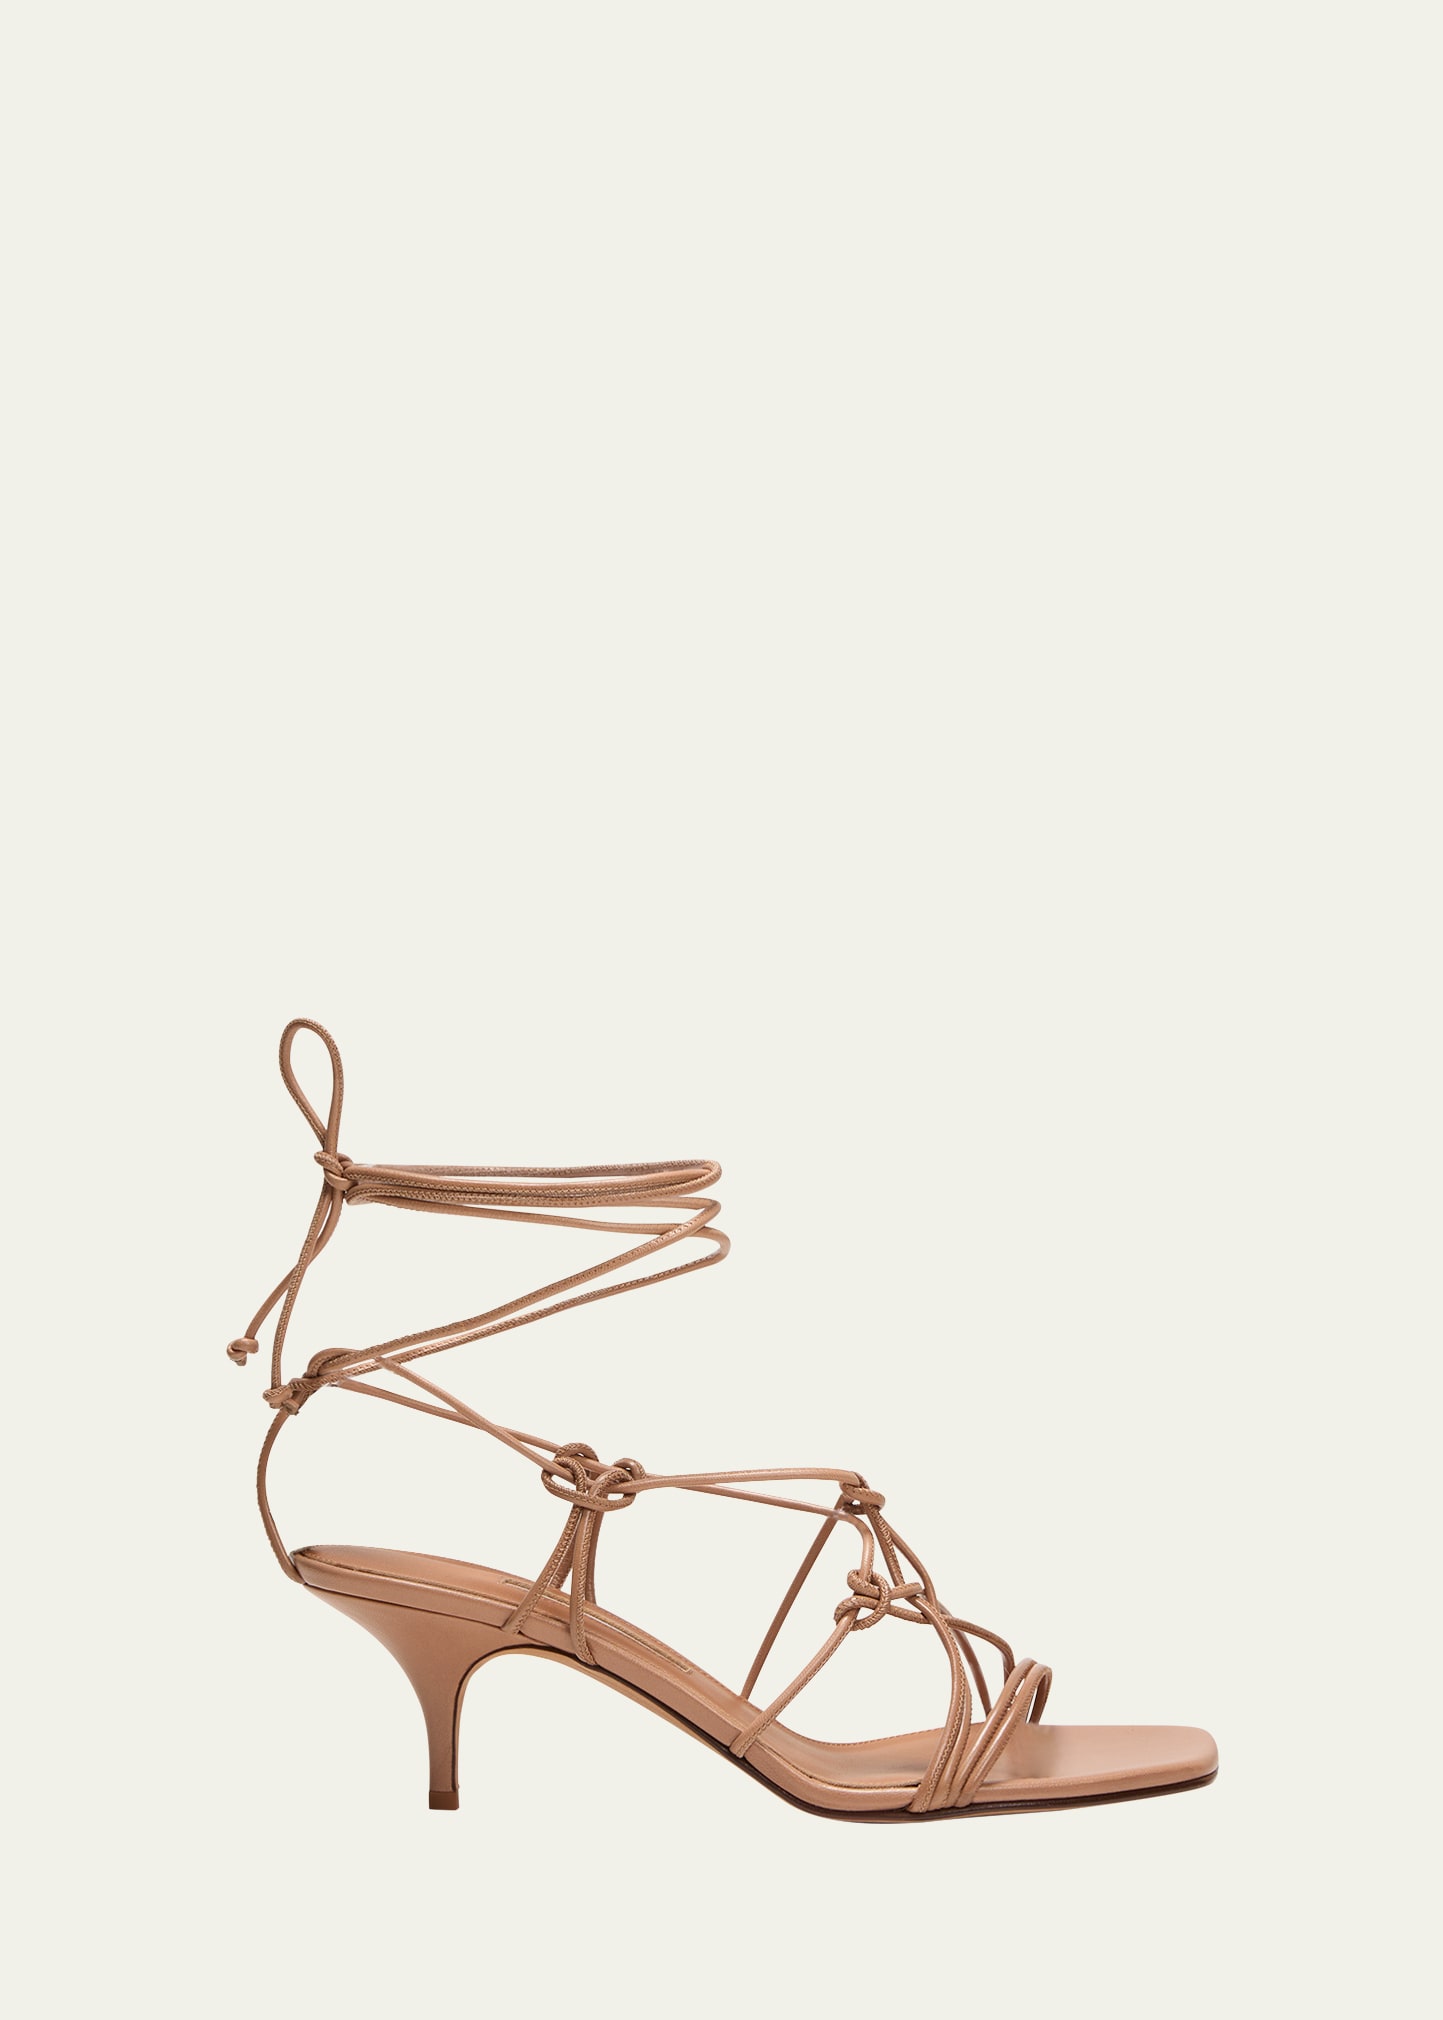 Emme Parsons Festa Knotted Leather Ankle-Wrap Sandals